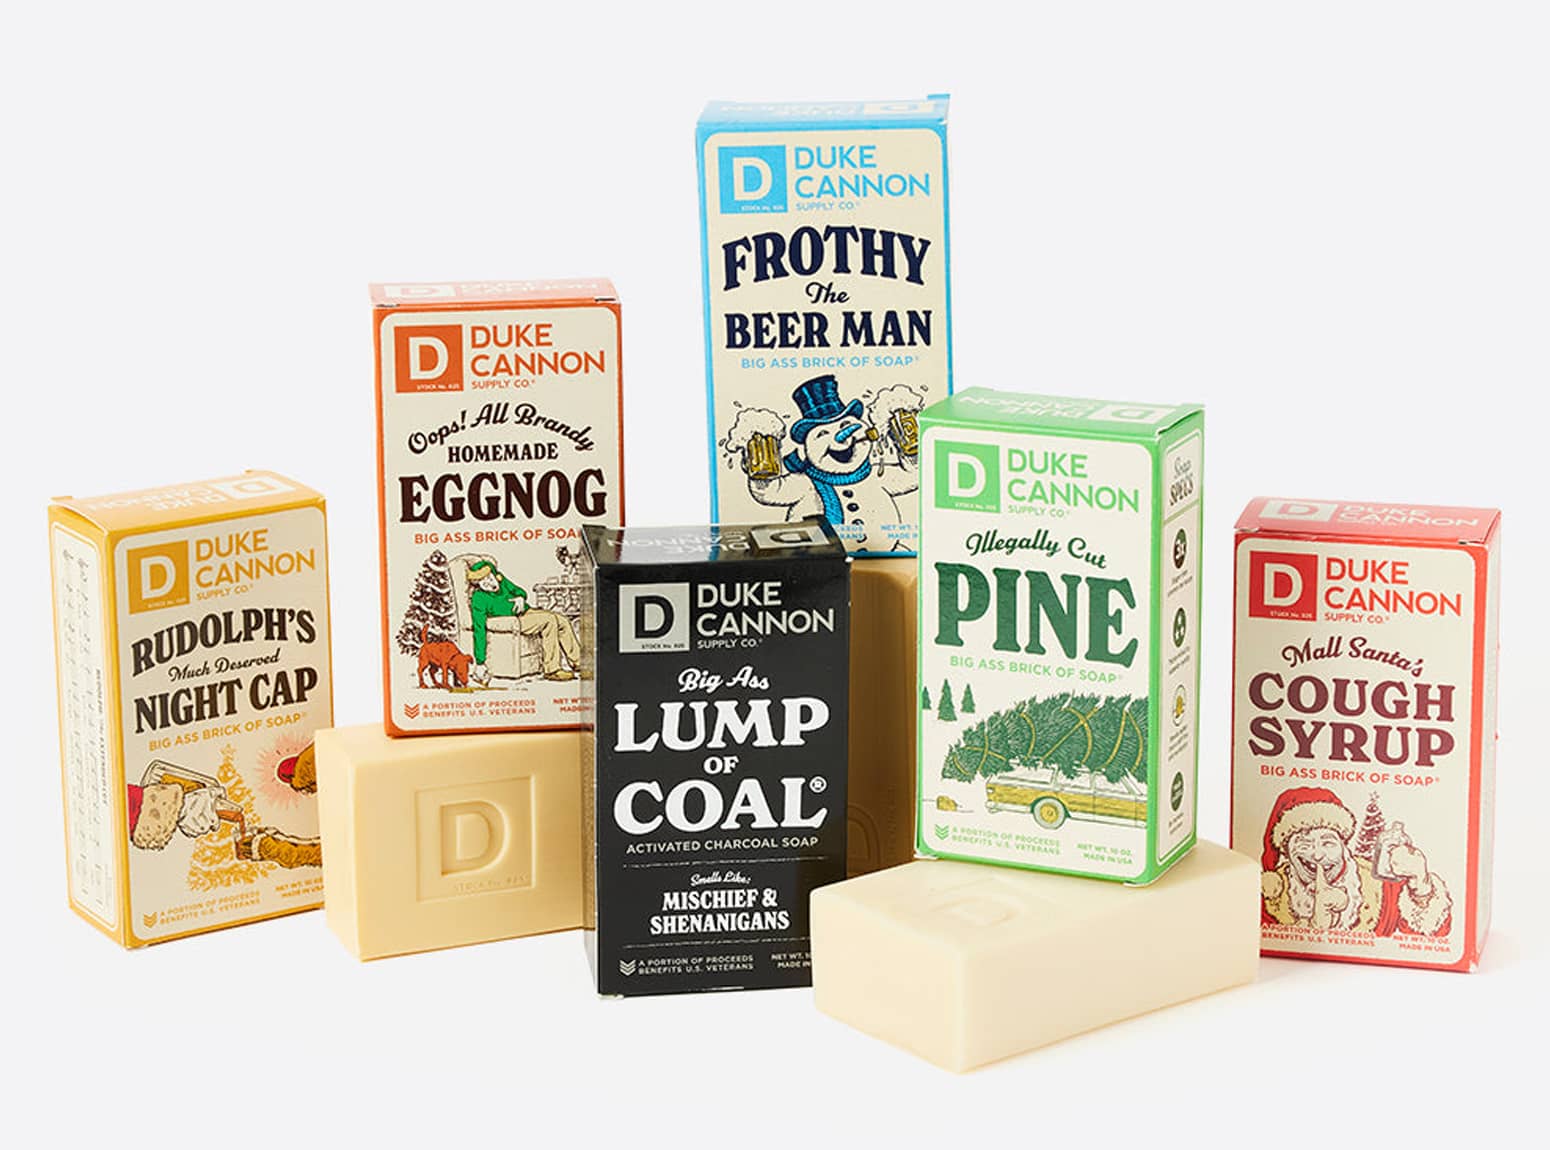 Duke Cannon Holiday Soaps - Illegally Cut Pine, Lump of Coal, and More